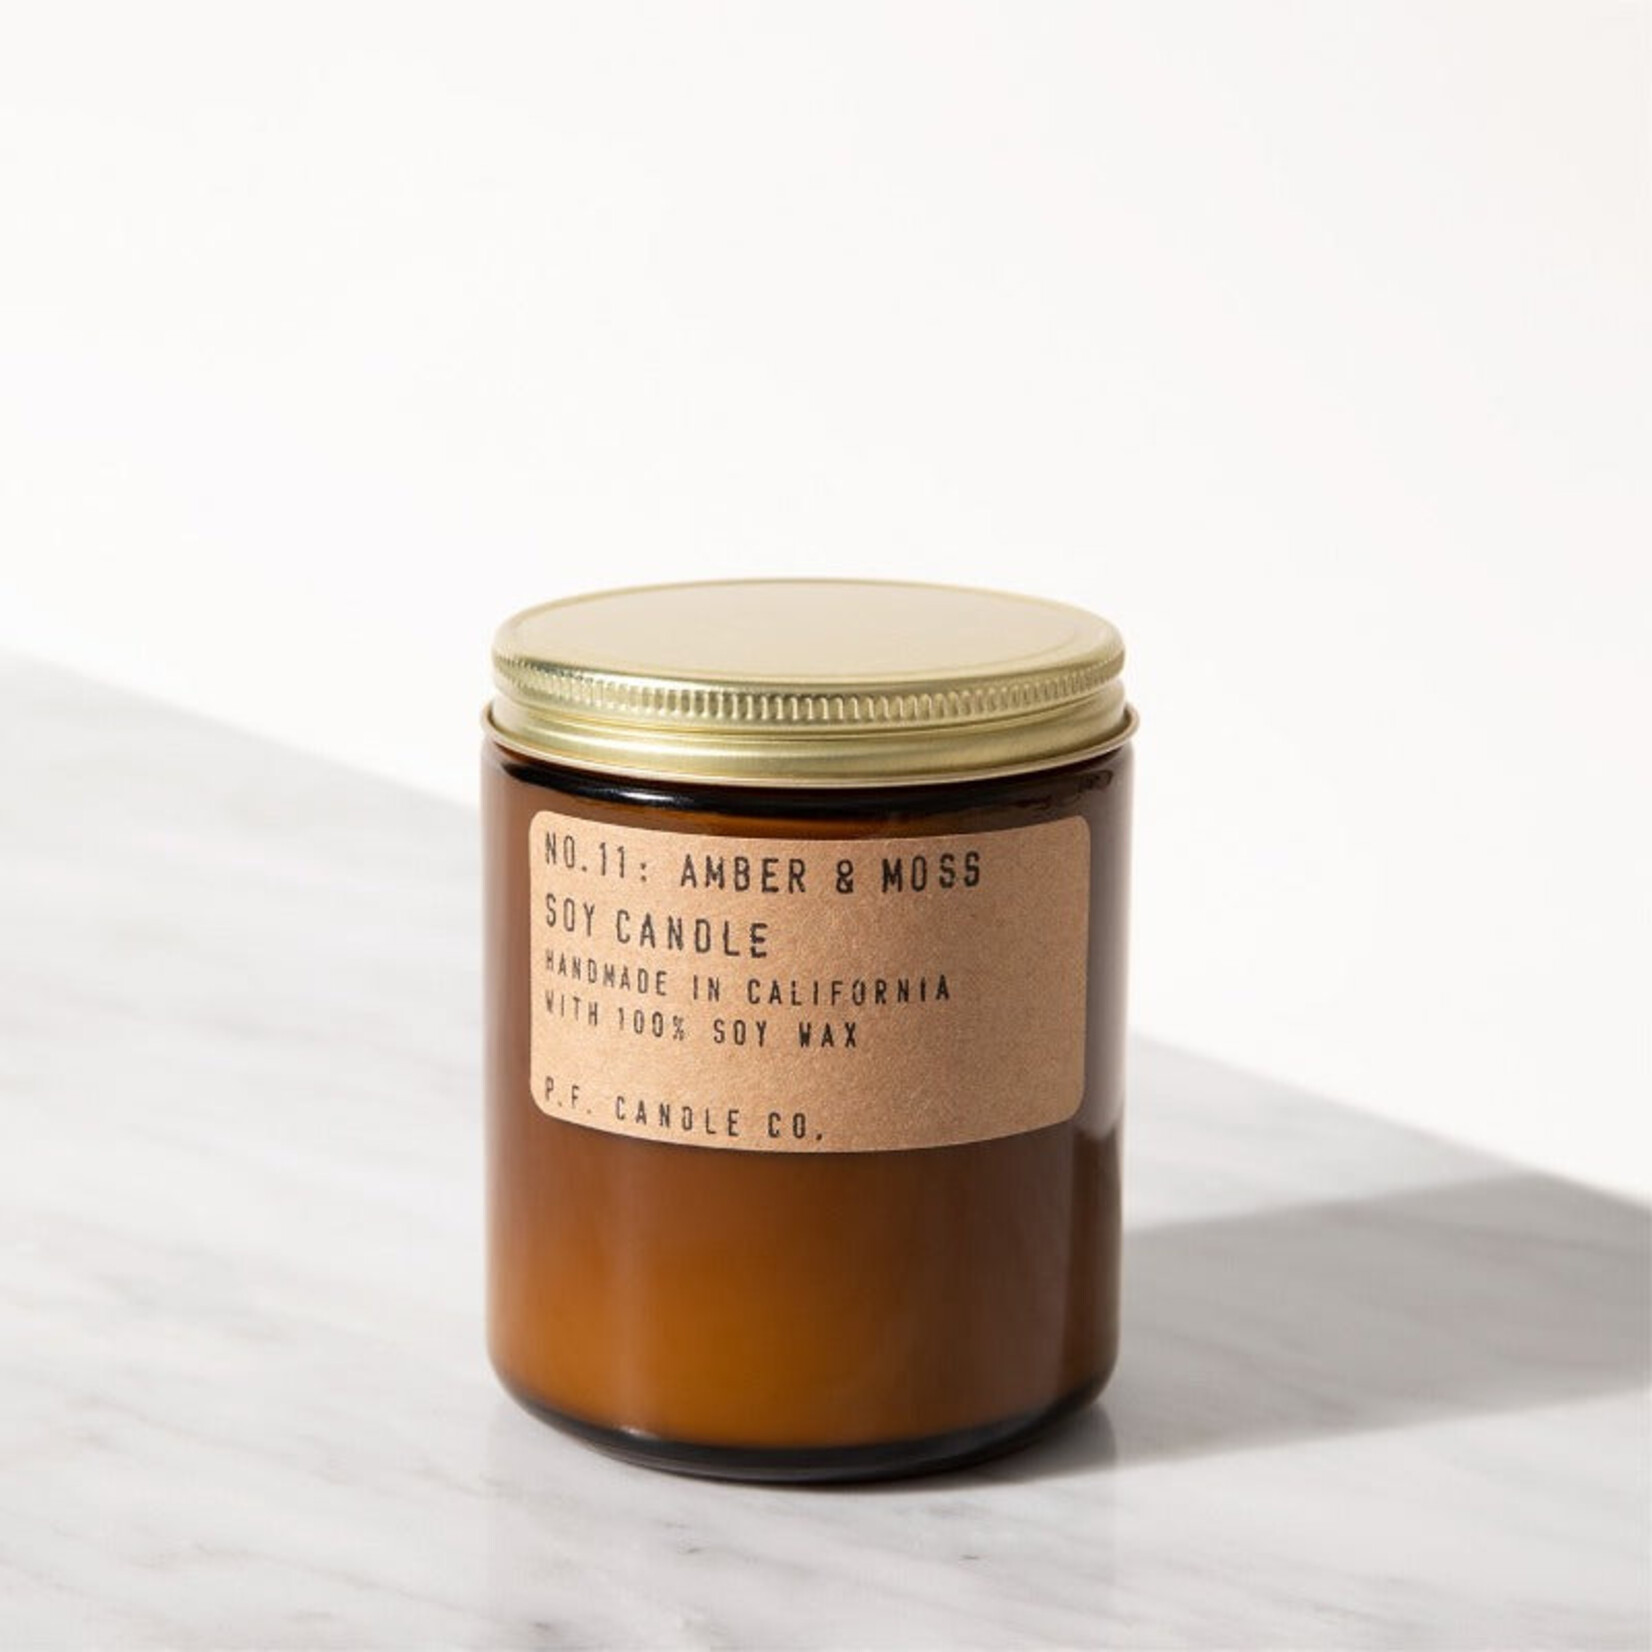 P.F. Candle Co. Amber & Moss - 7.2 oz Standard Soy Candle